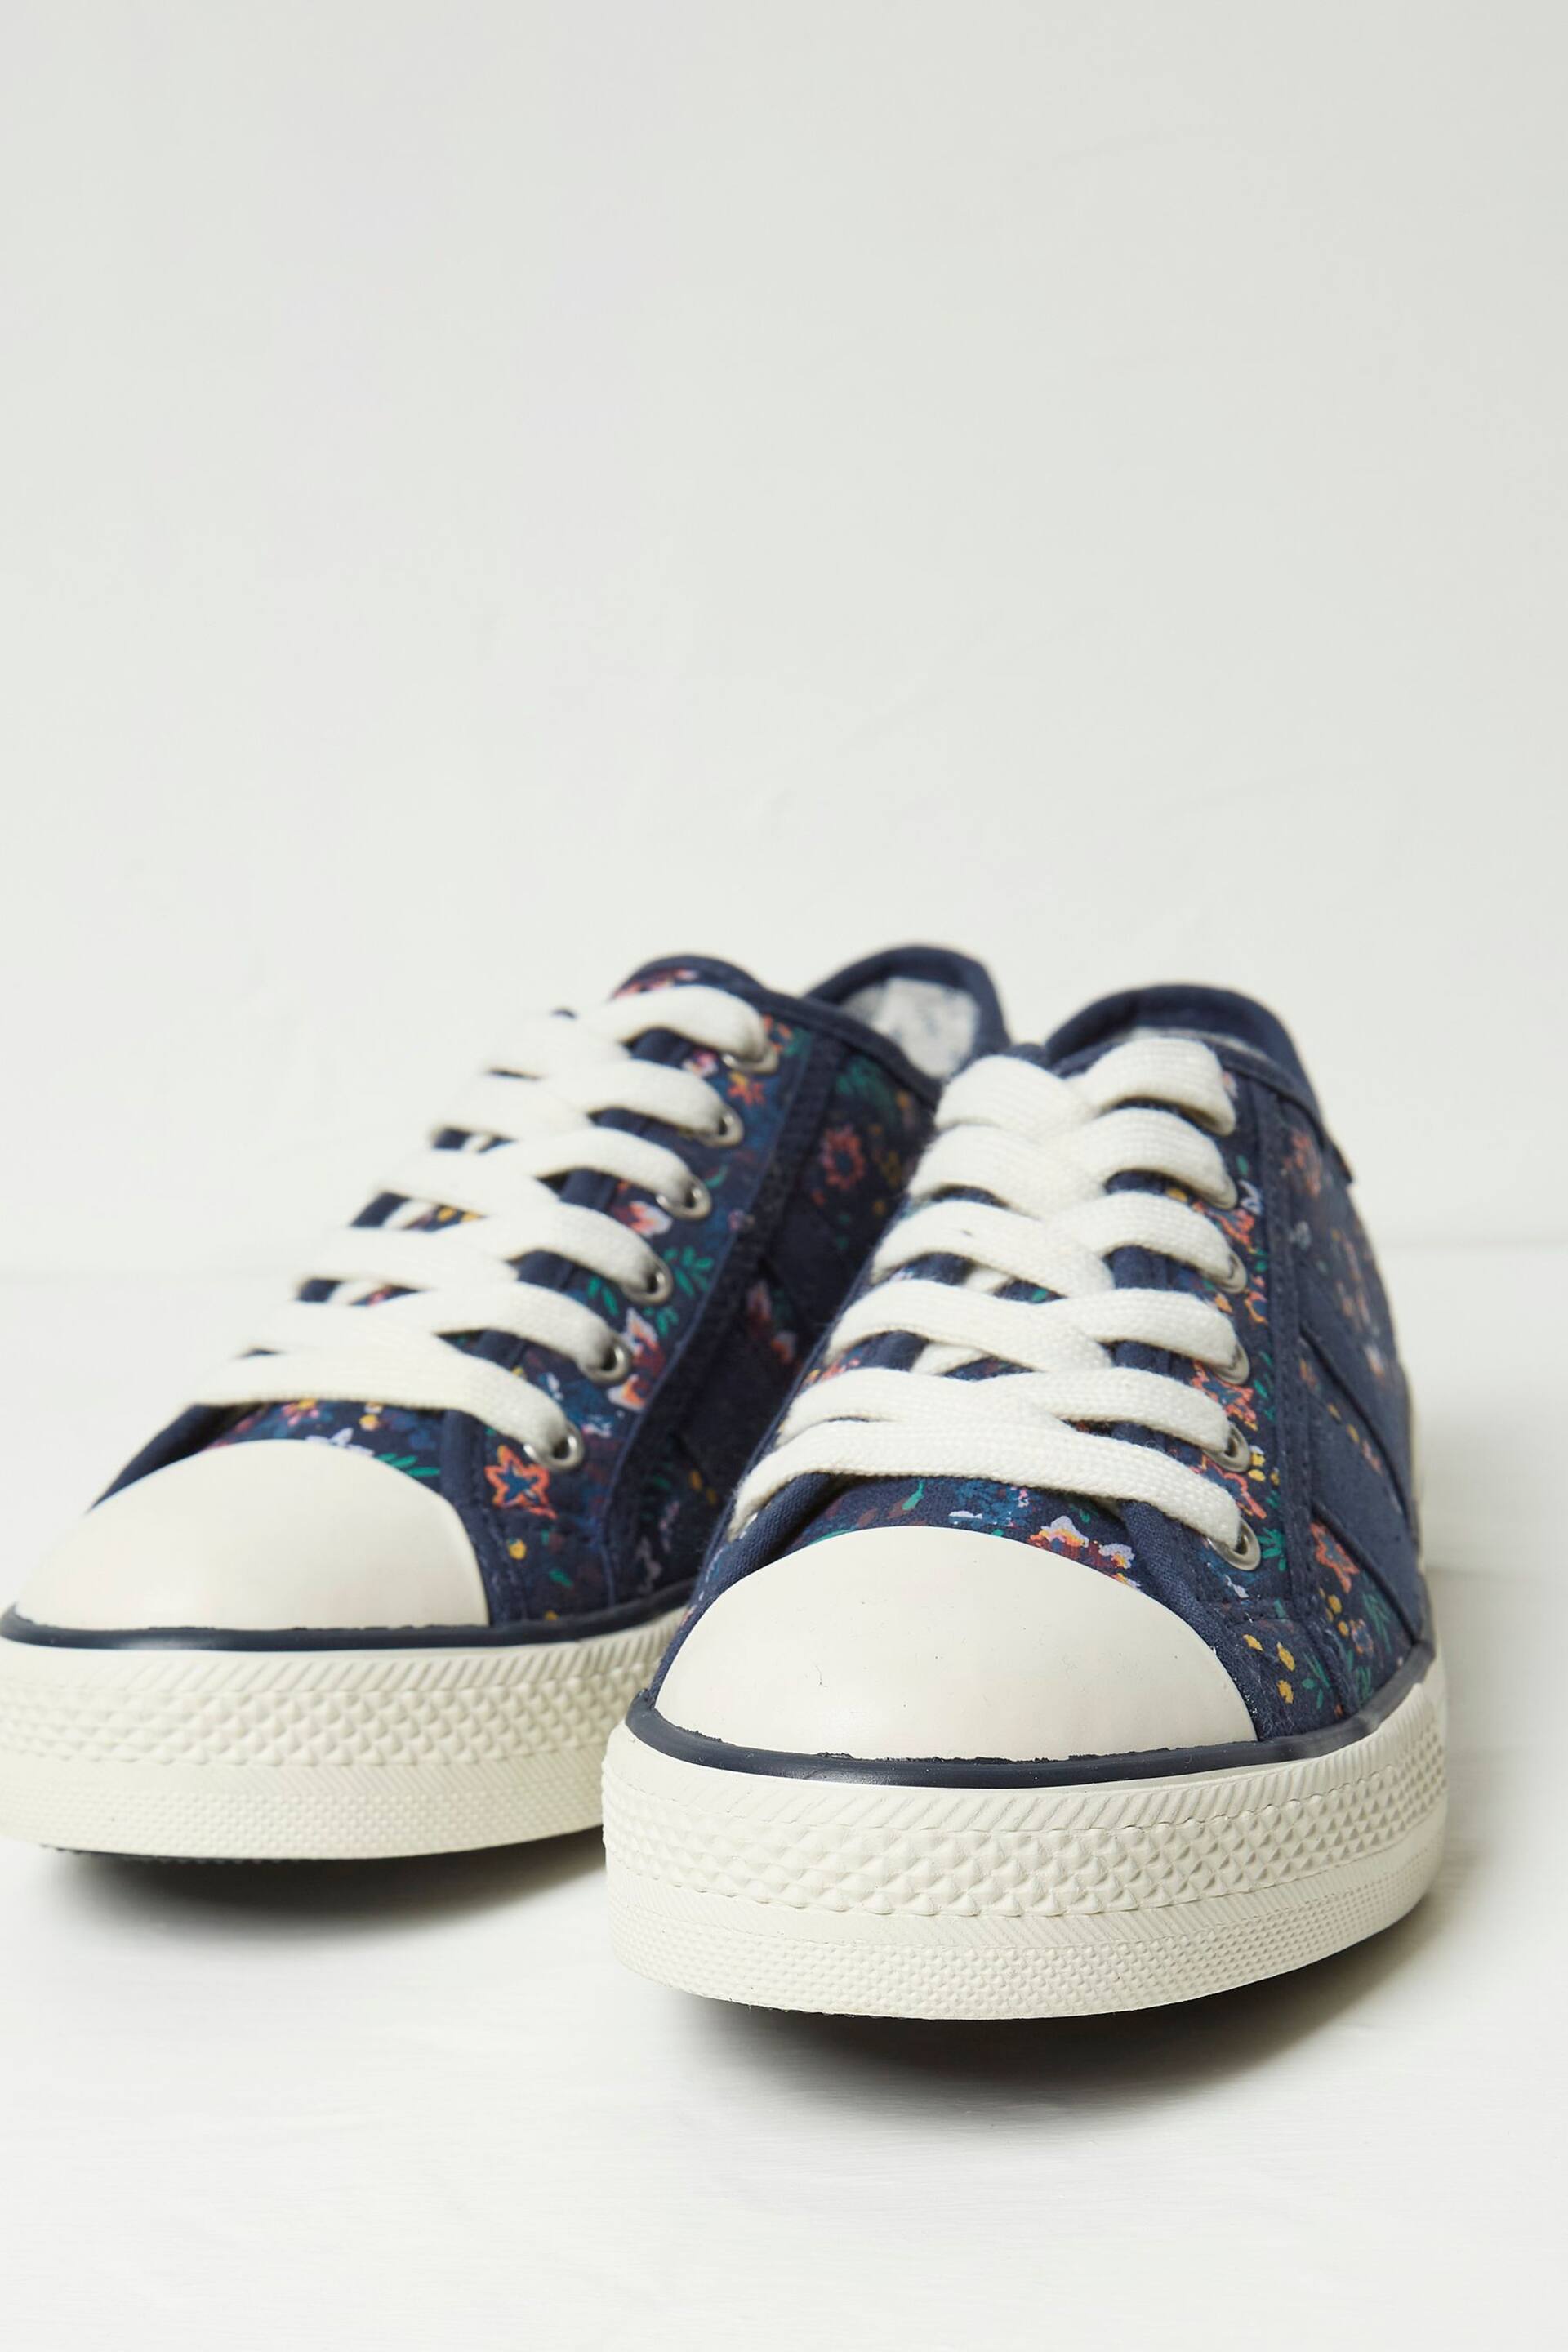 FatFace Blue Raya Canvas Lace Up Trainers - Image 2 of 3